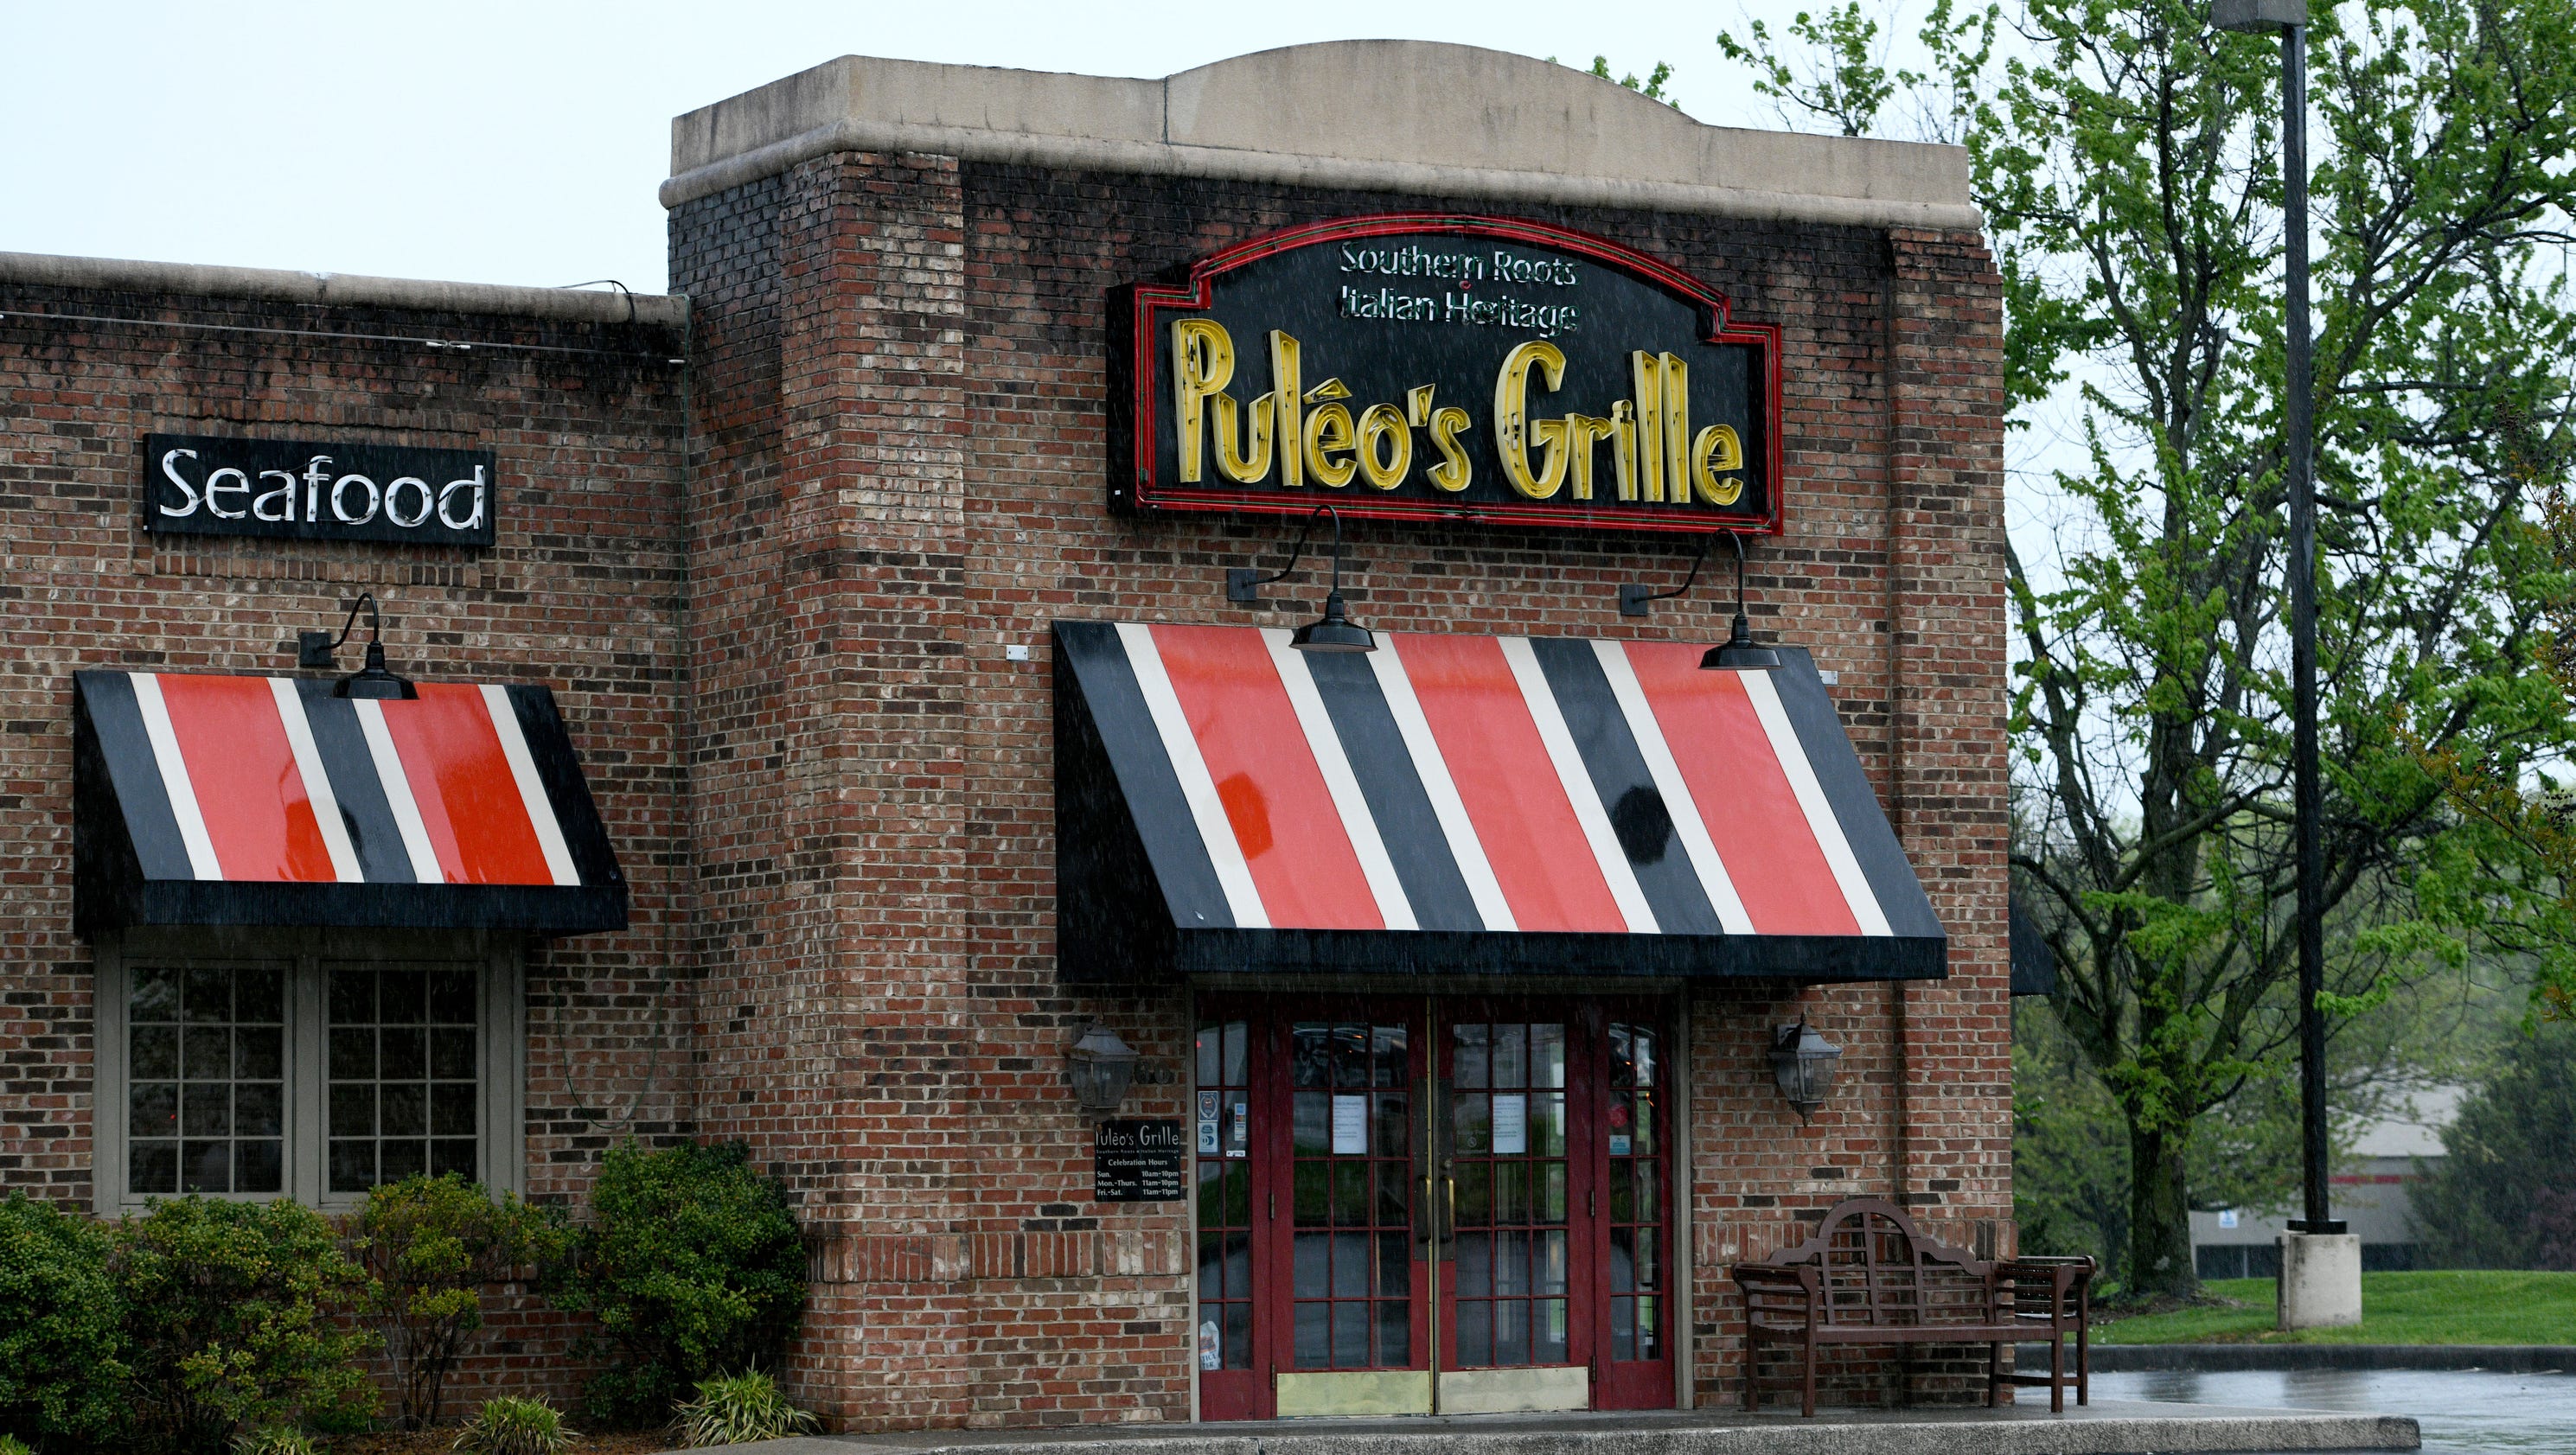 3 Knoxville restaurants have closed with 1 to reopen after renovations